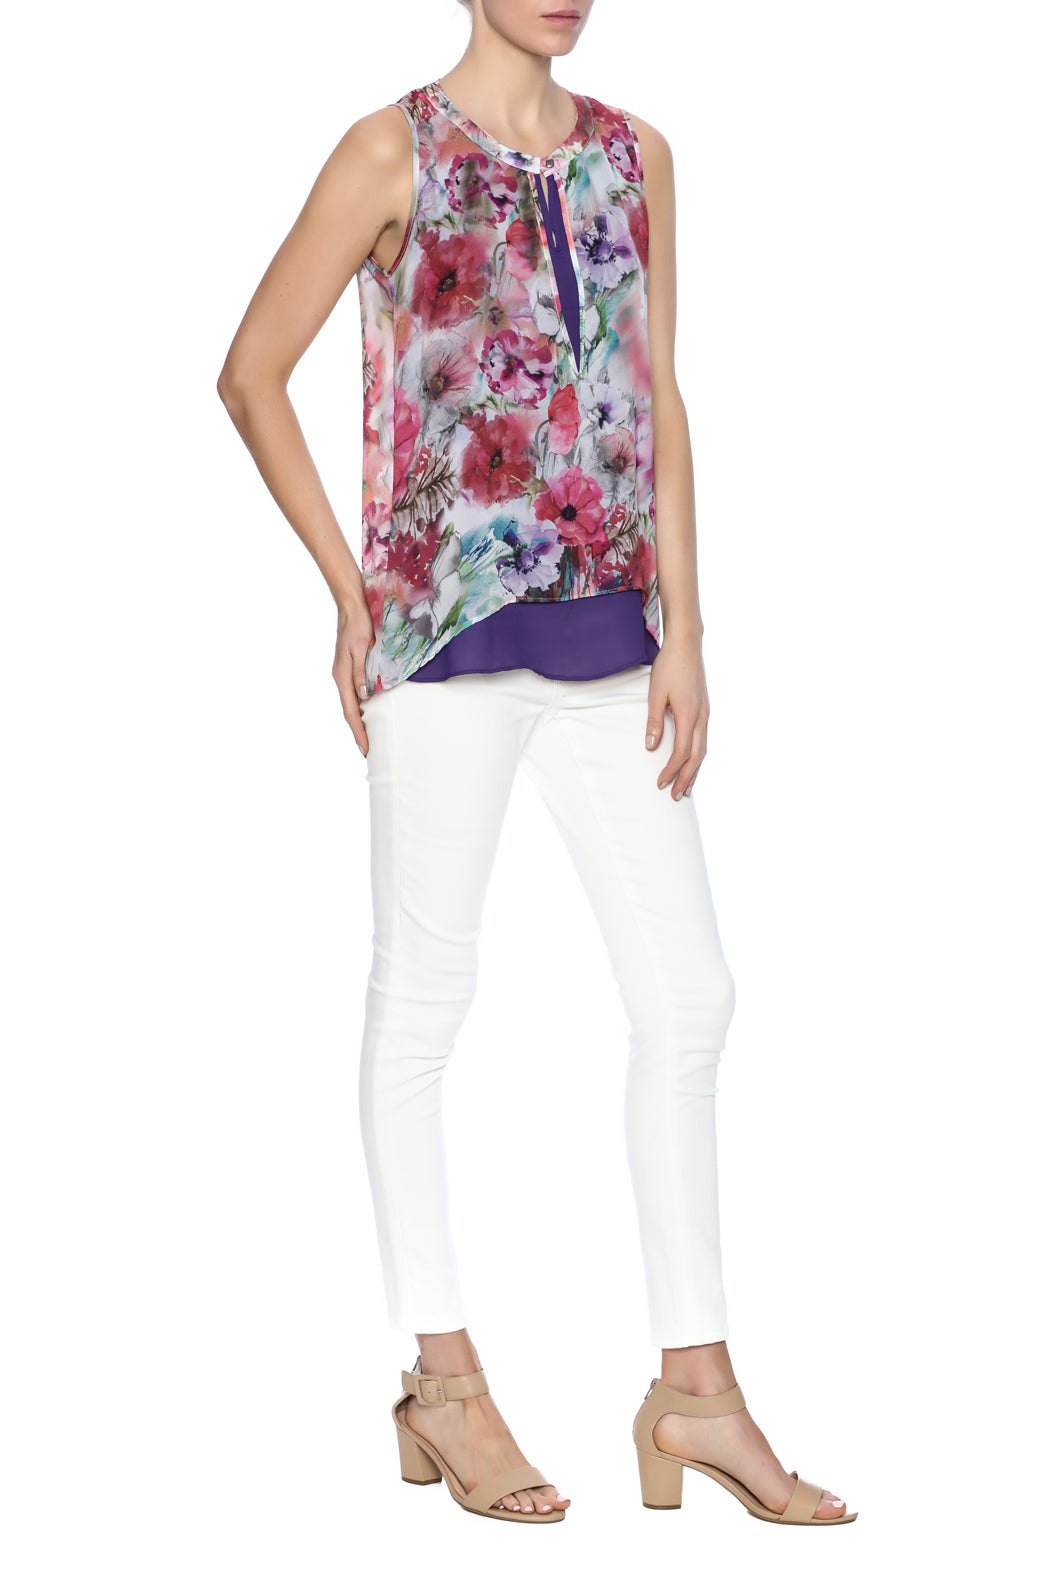 flower print blouse, sheer fabric, layer front, scoop neckline with slit, button closure at front and sleeveless.